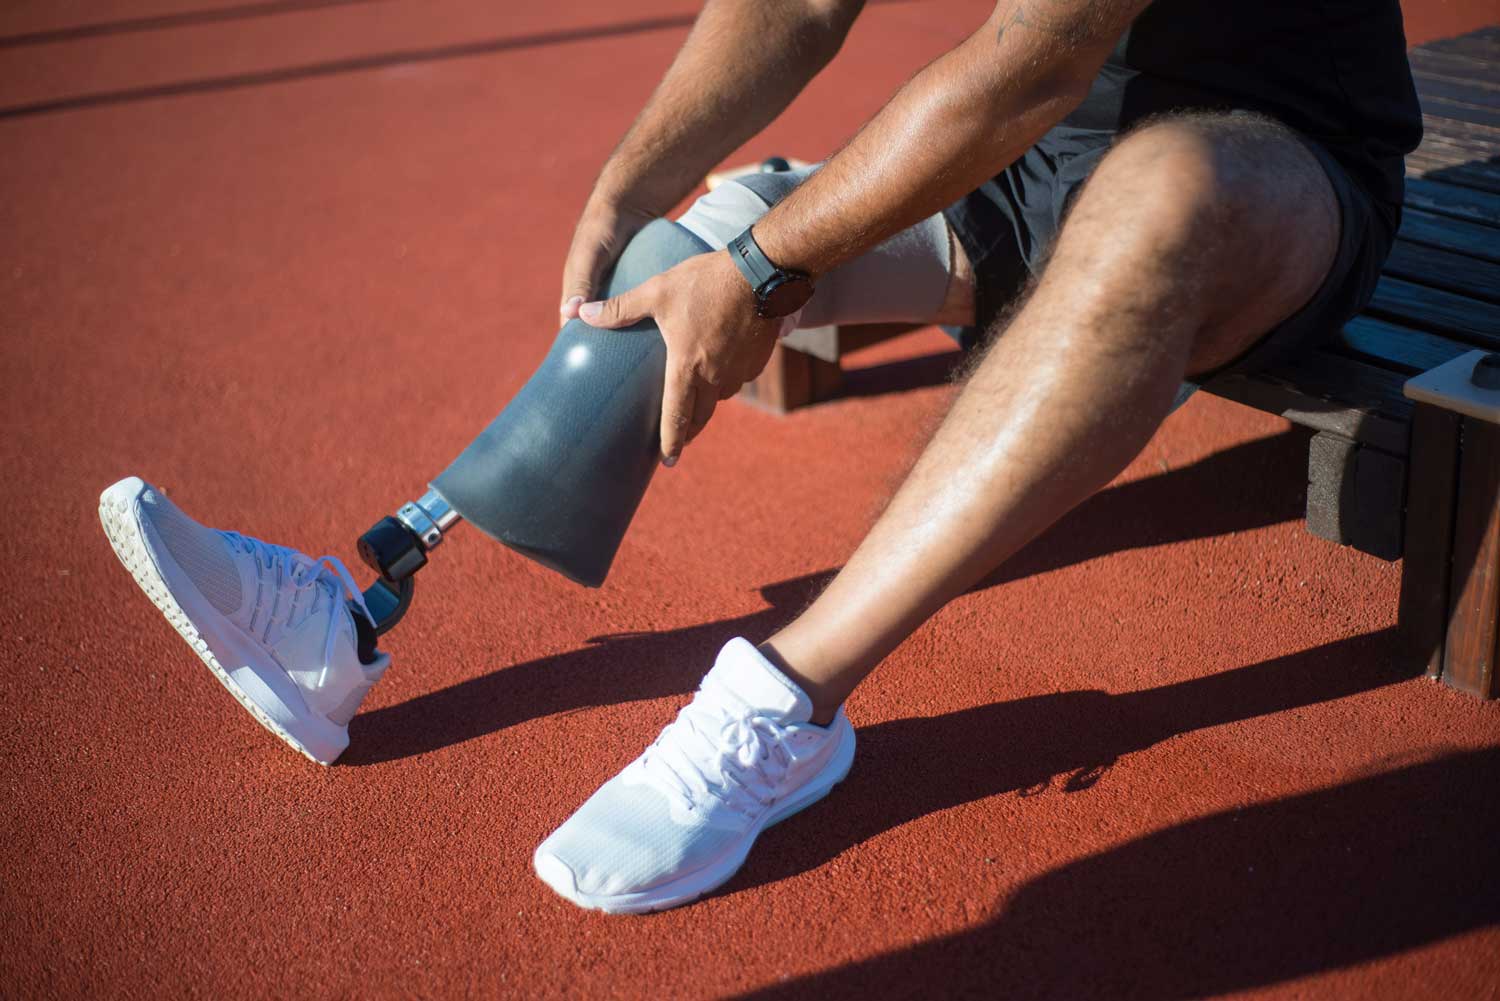 Man at a track putting sleeve over prosthetic leg before exercising